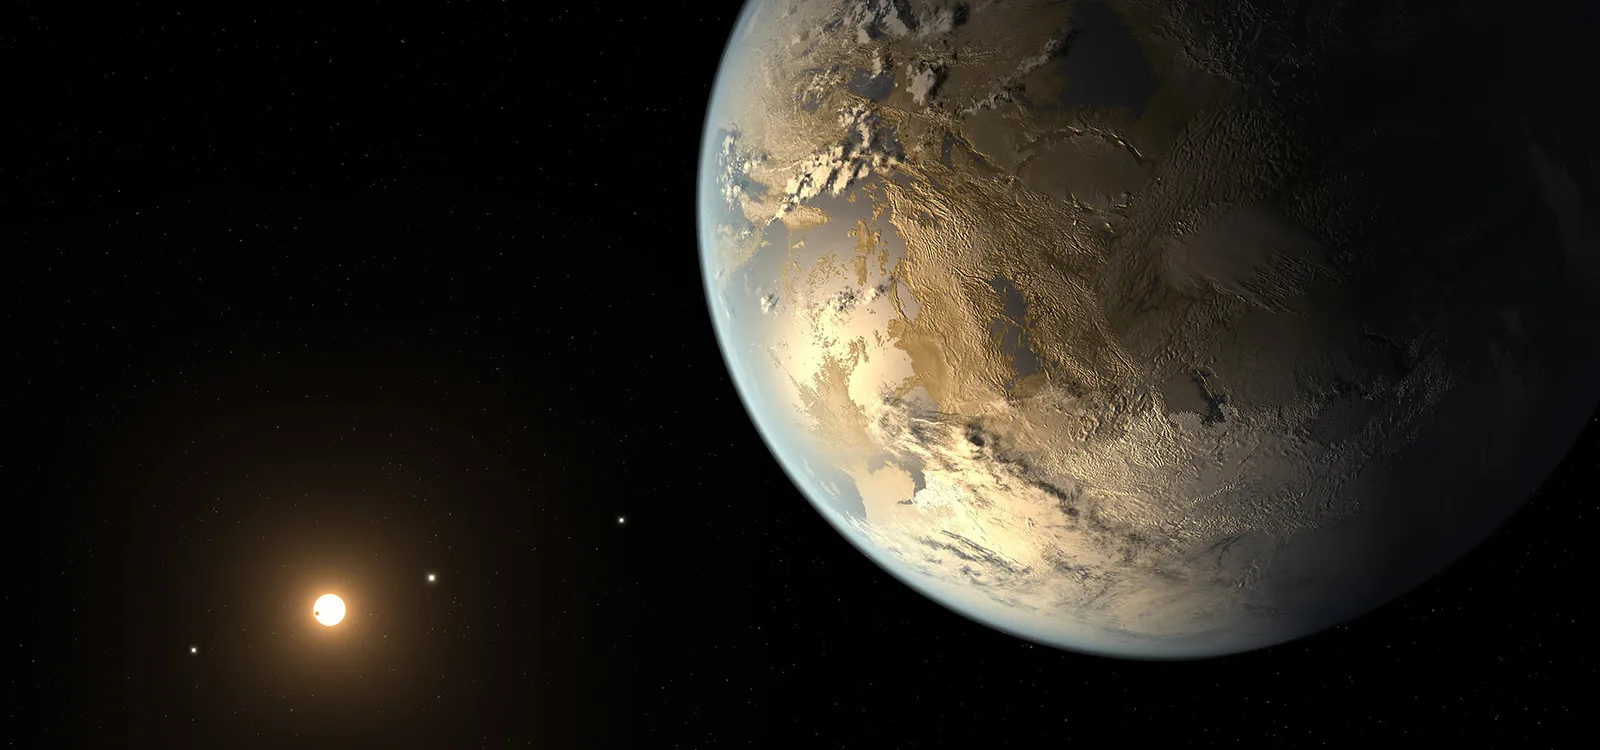 Exoplanets, Where Do We Fit In?